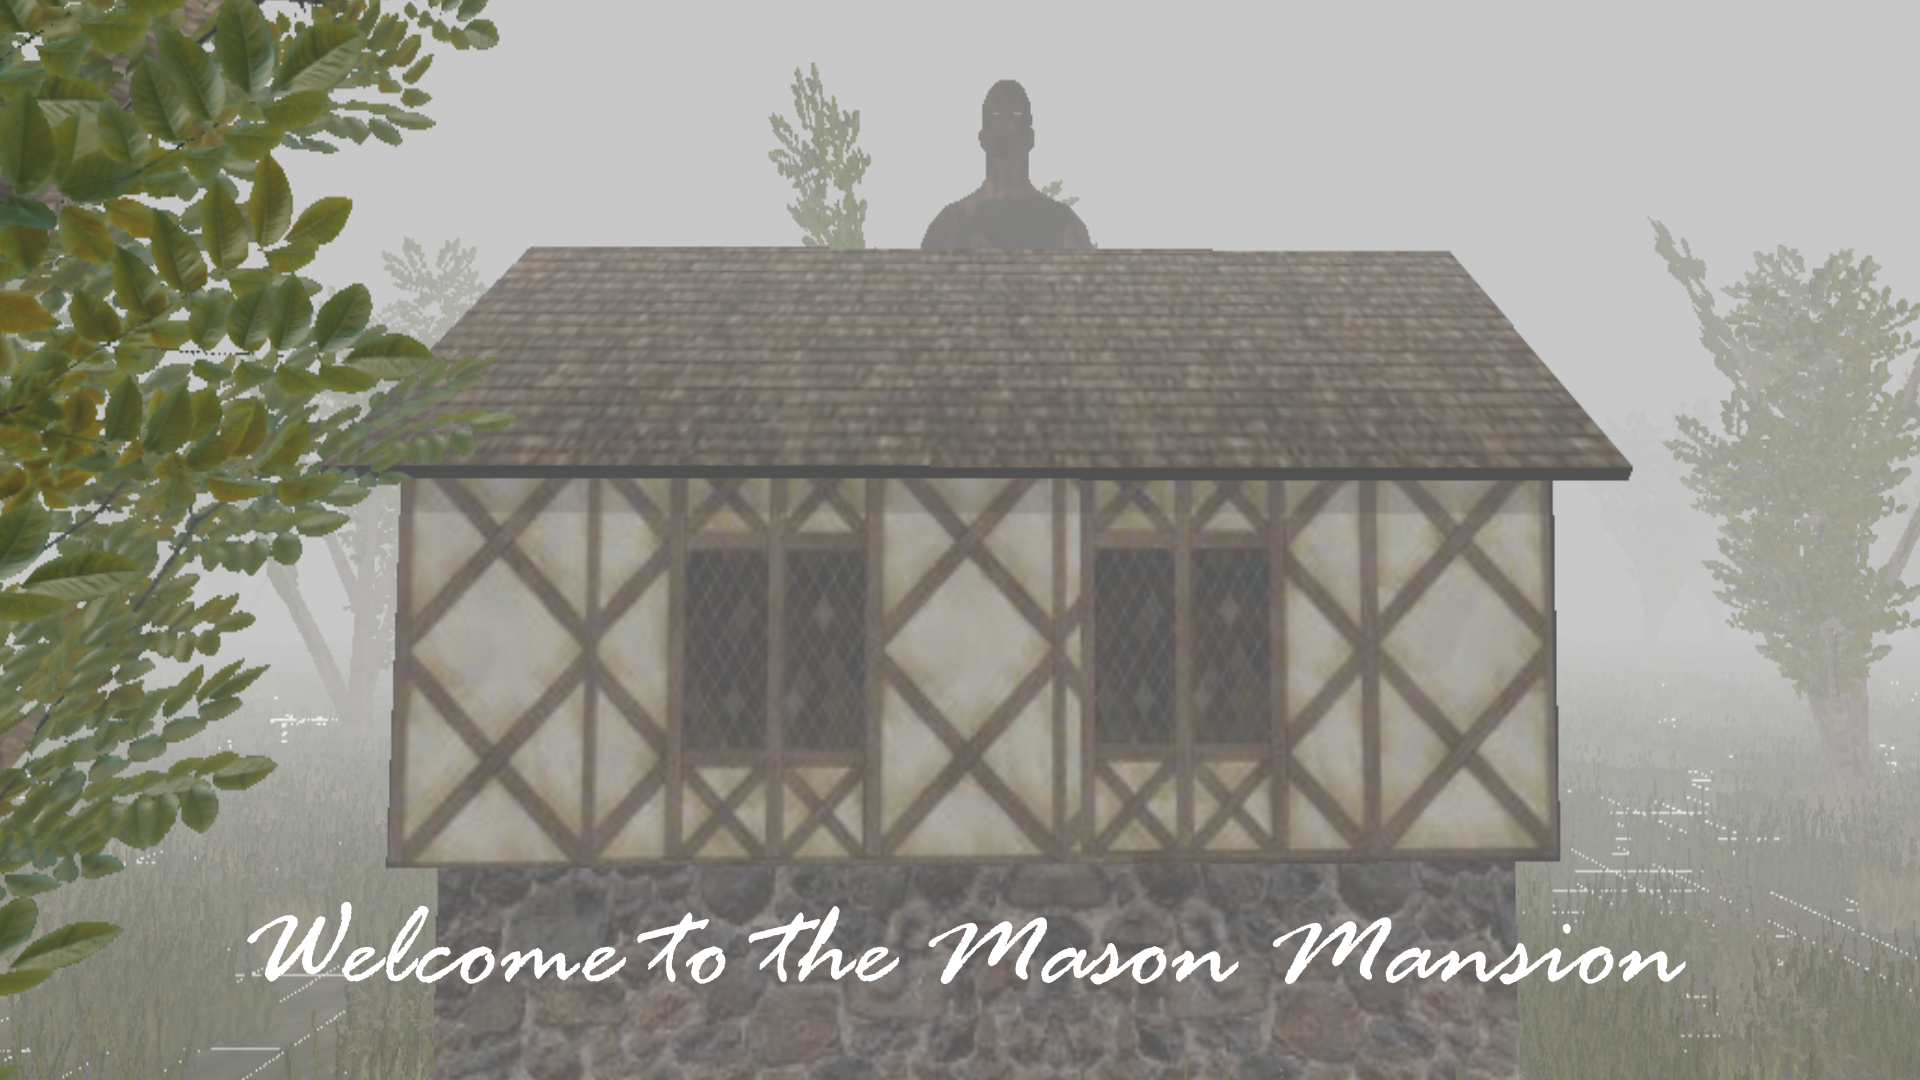 >Welcome to the Mason mansion<